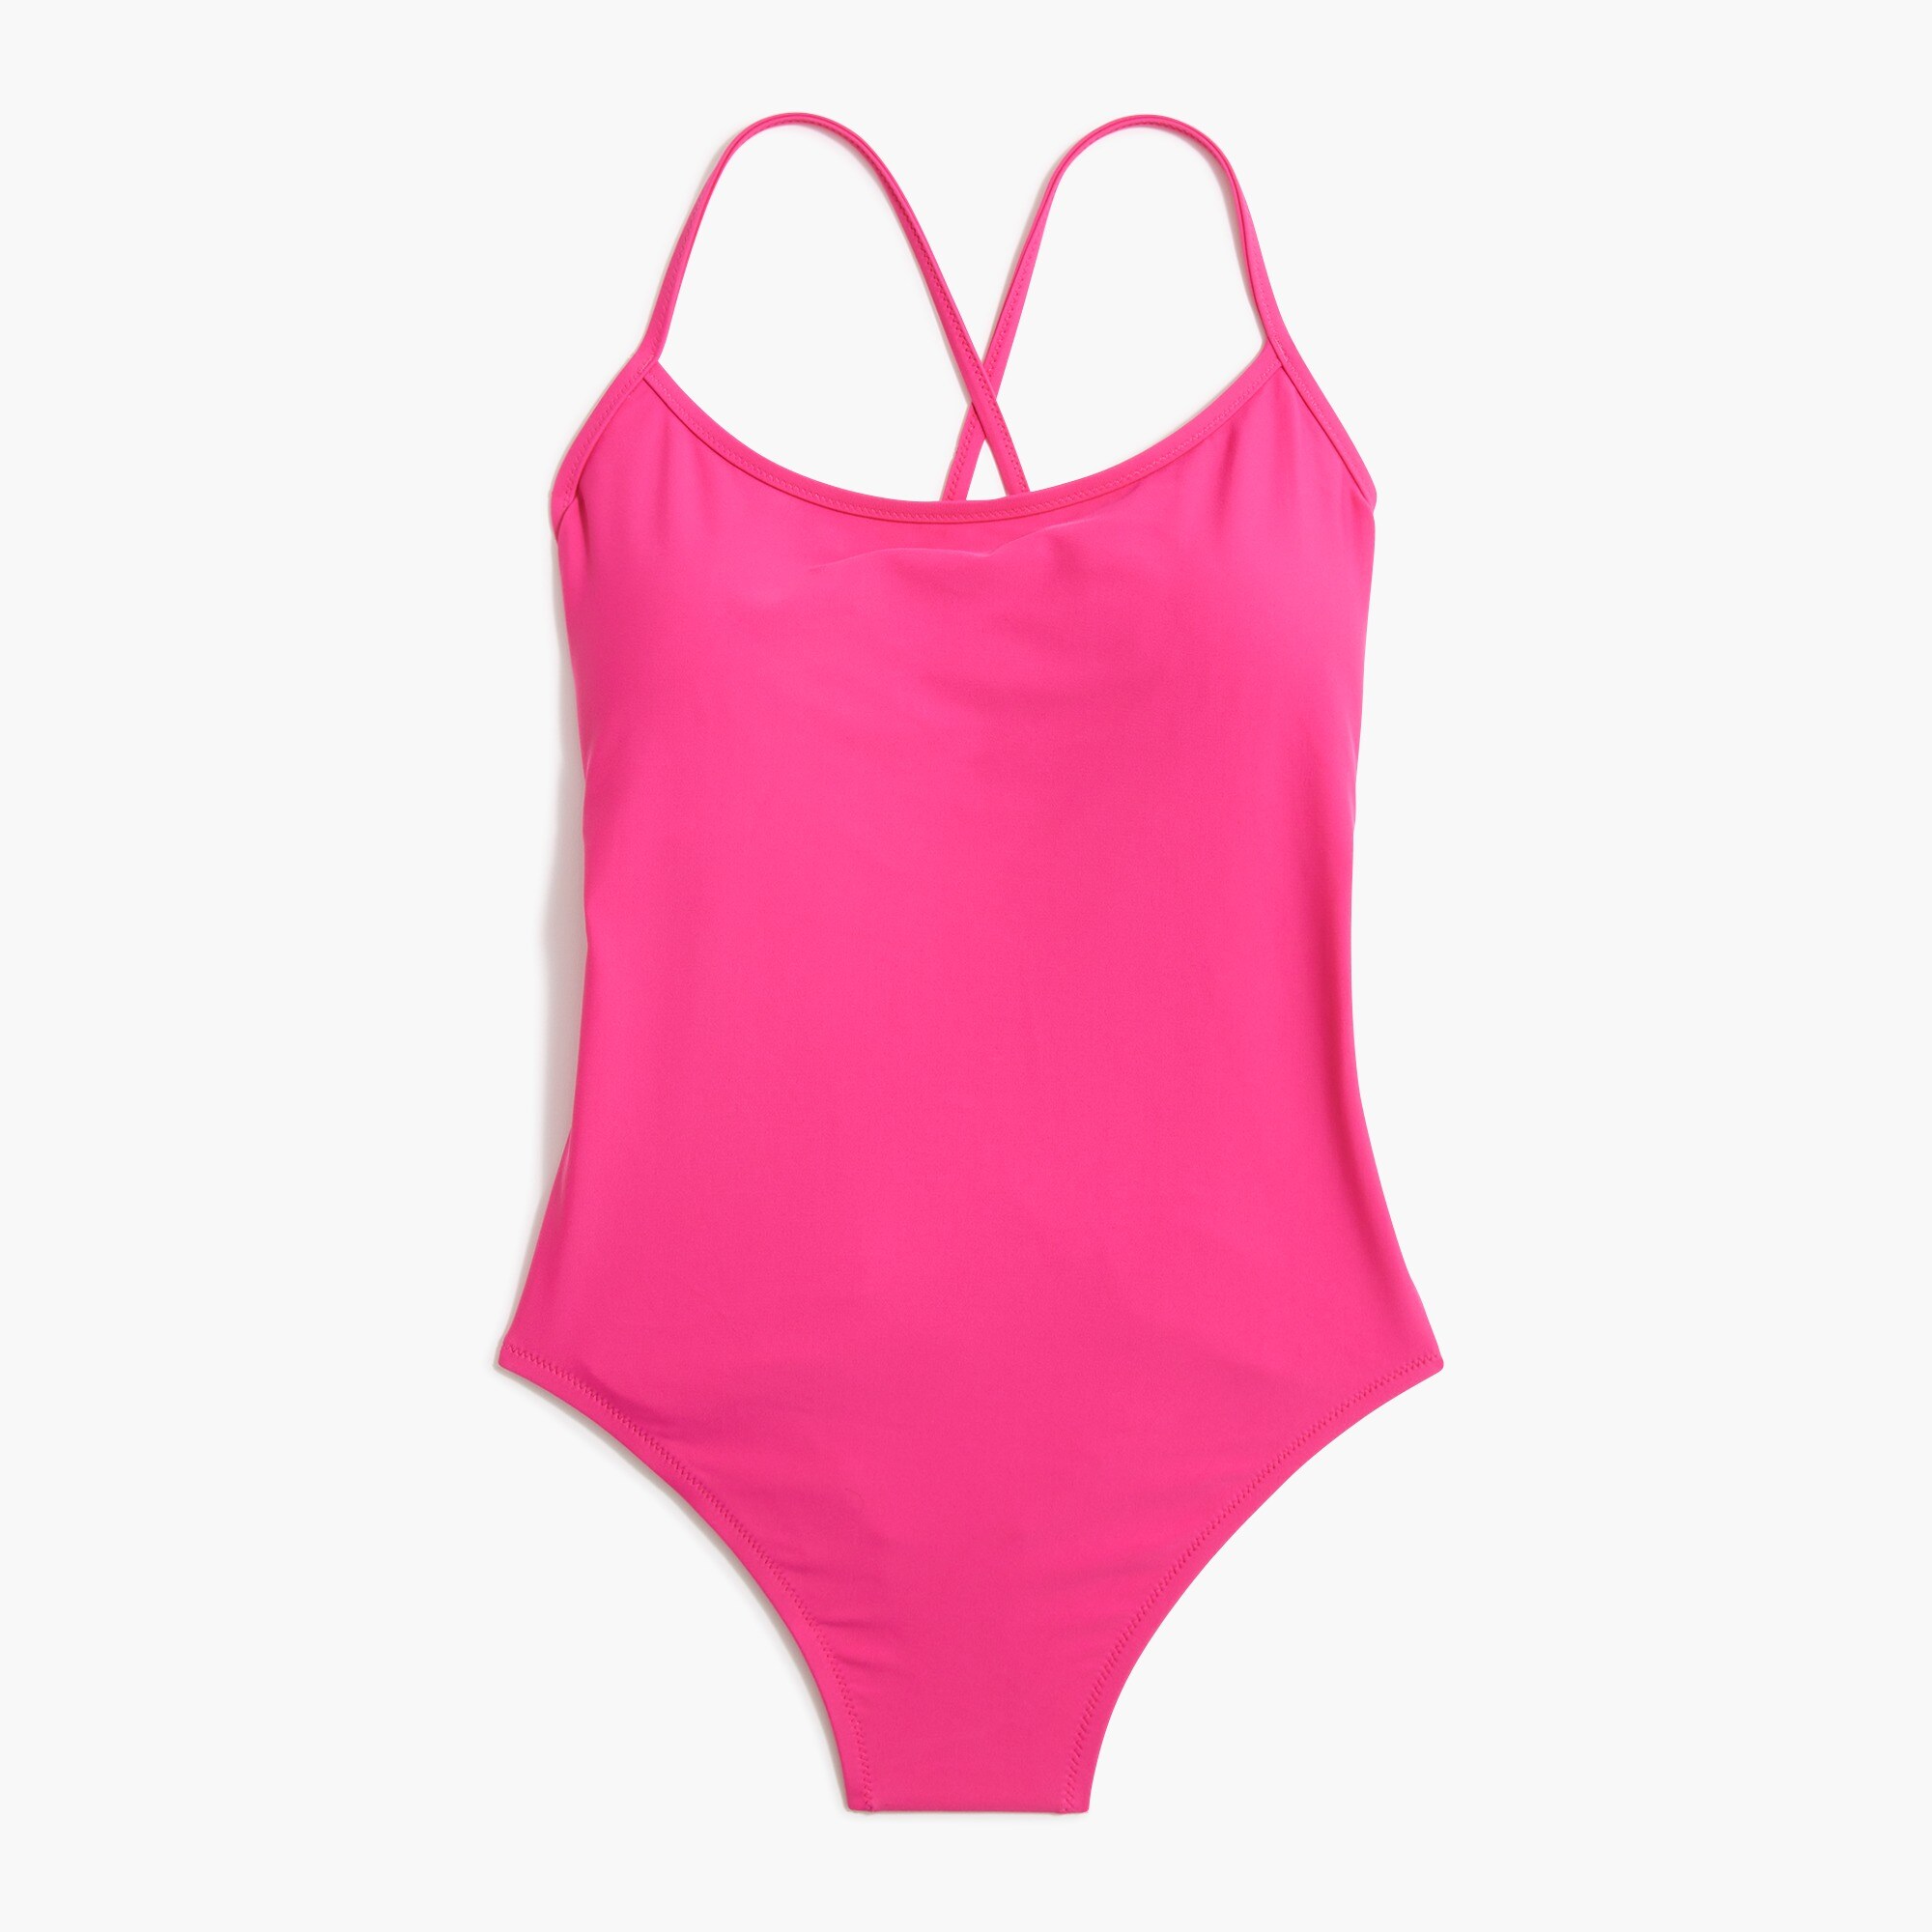  One-piece swimsuit with crisscross back